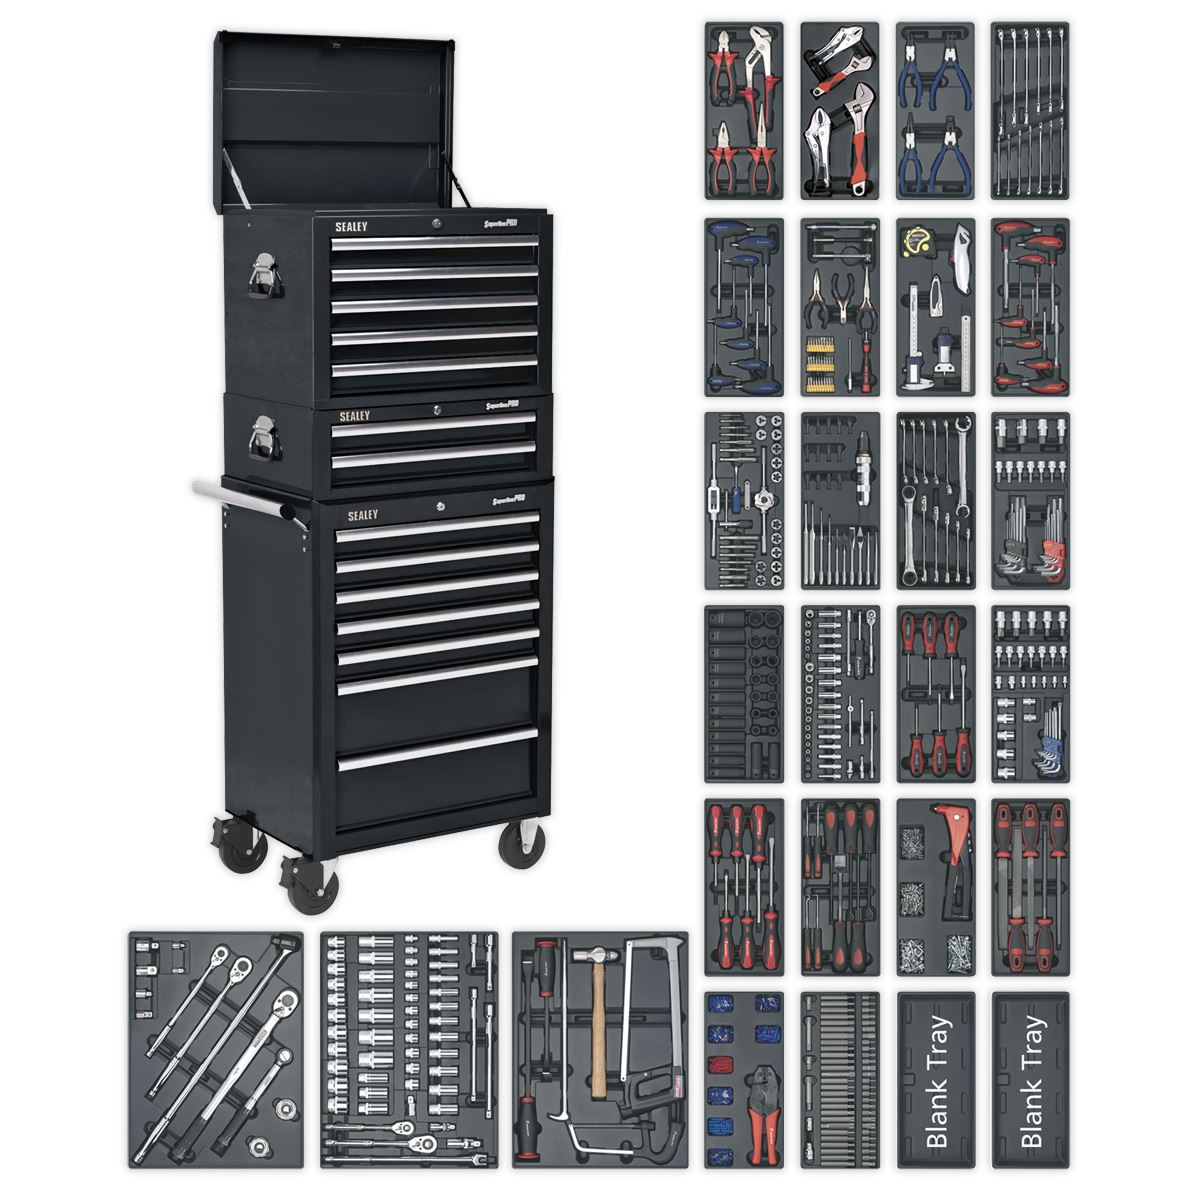 Sealey Superline Pro Tool Chest Combination 14 Drawer with Ball-Bearing Slides - Black & 1179pc Tool Kit